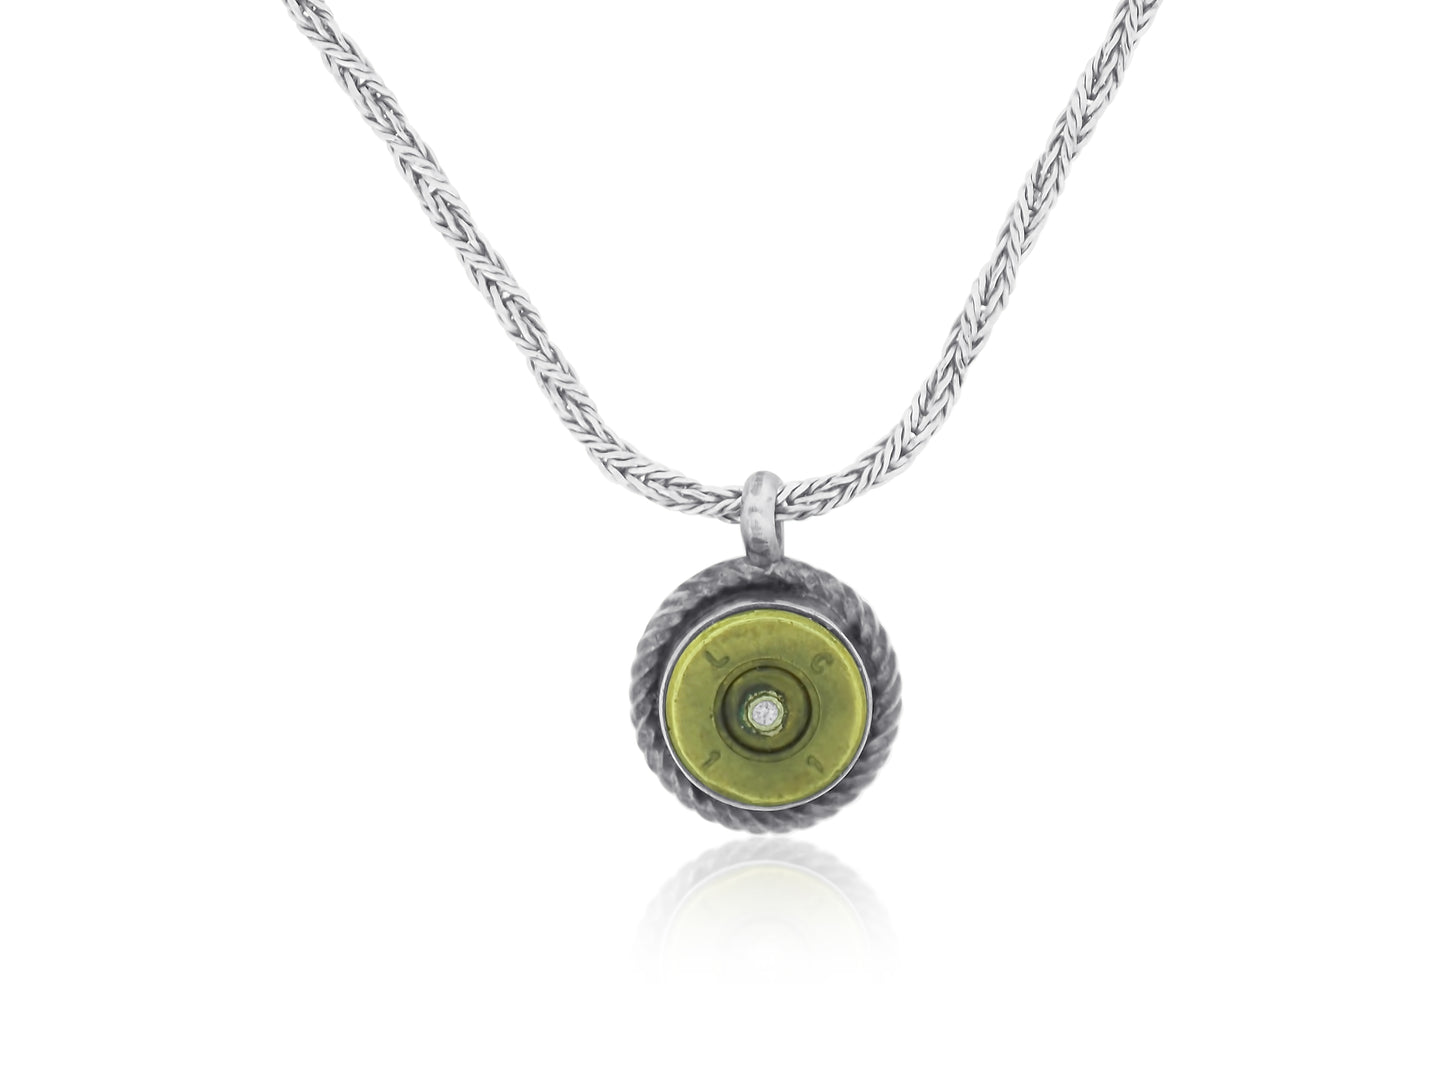 Shell Casing Memorial Jewelry